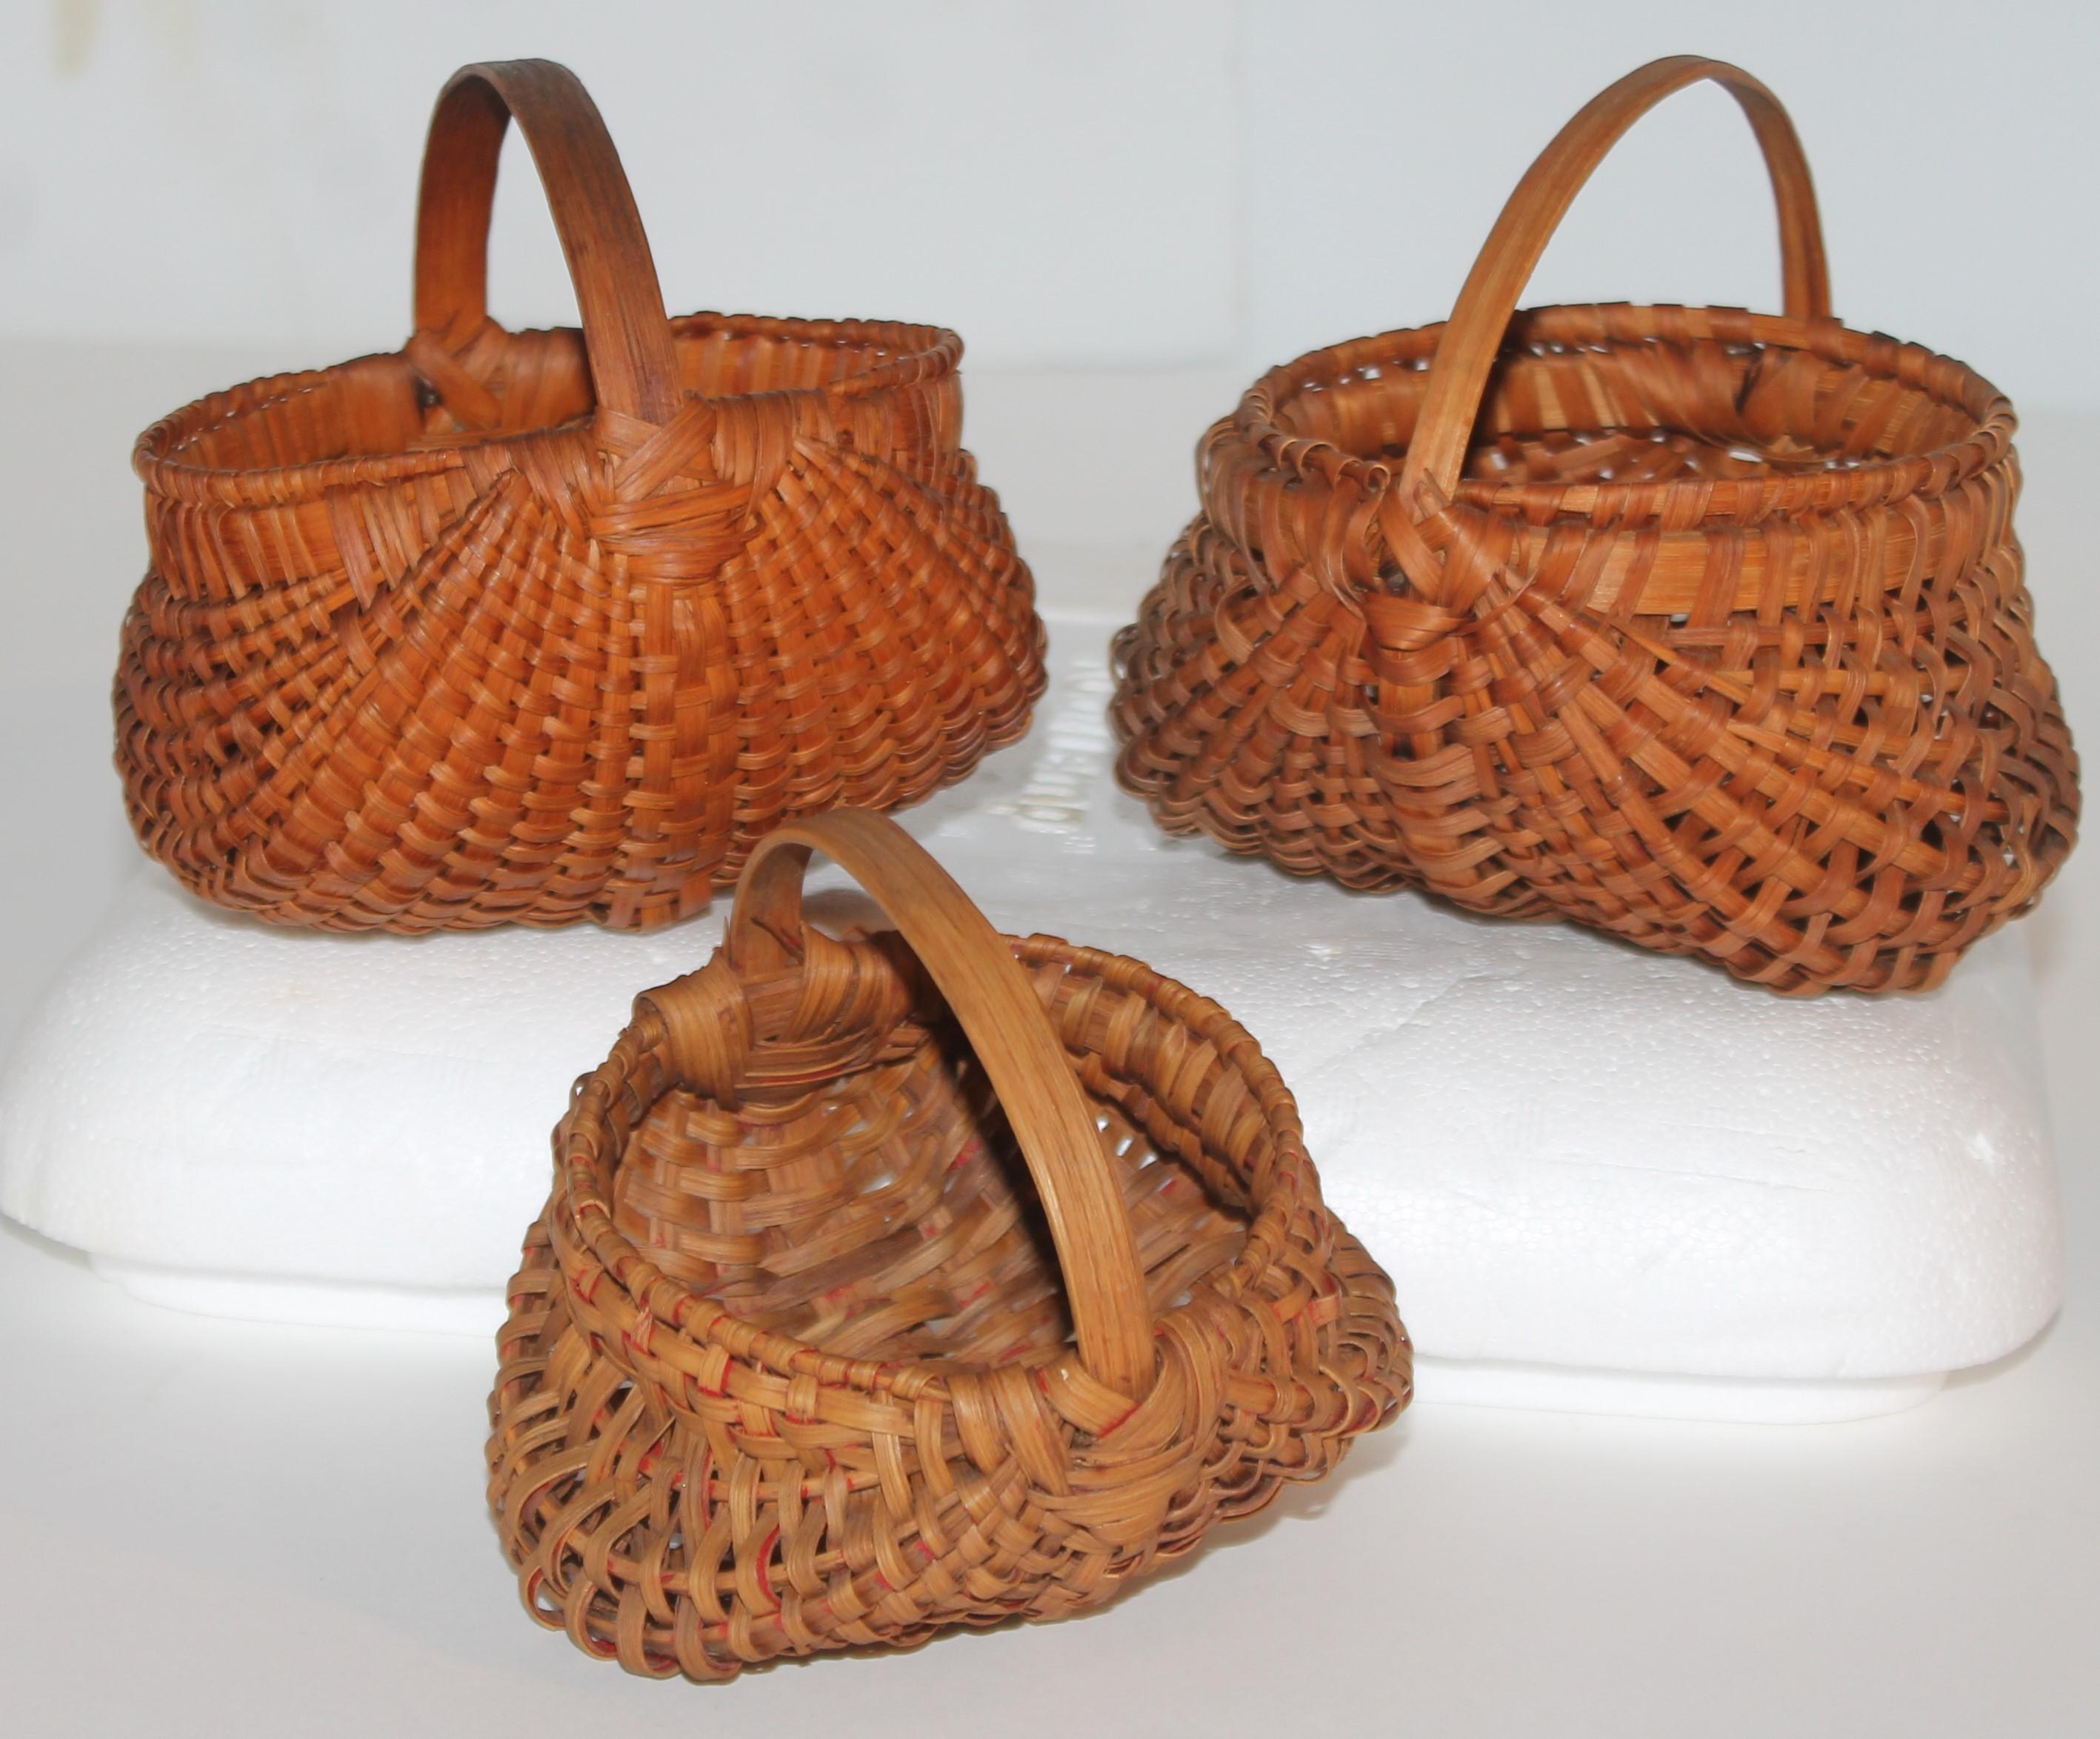 Collection of super rare miniature 19th C hiney or buttocks baskets in mint condition. These hand made and tightly woven baskets come from a folk art collection in Pennsylvania. Its rare to find one in such great condition and to find three is like